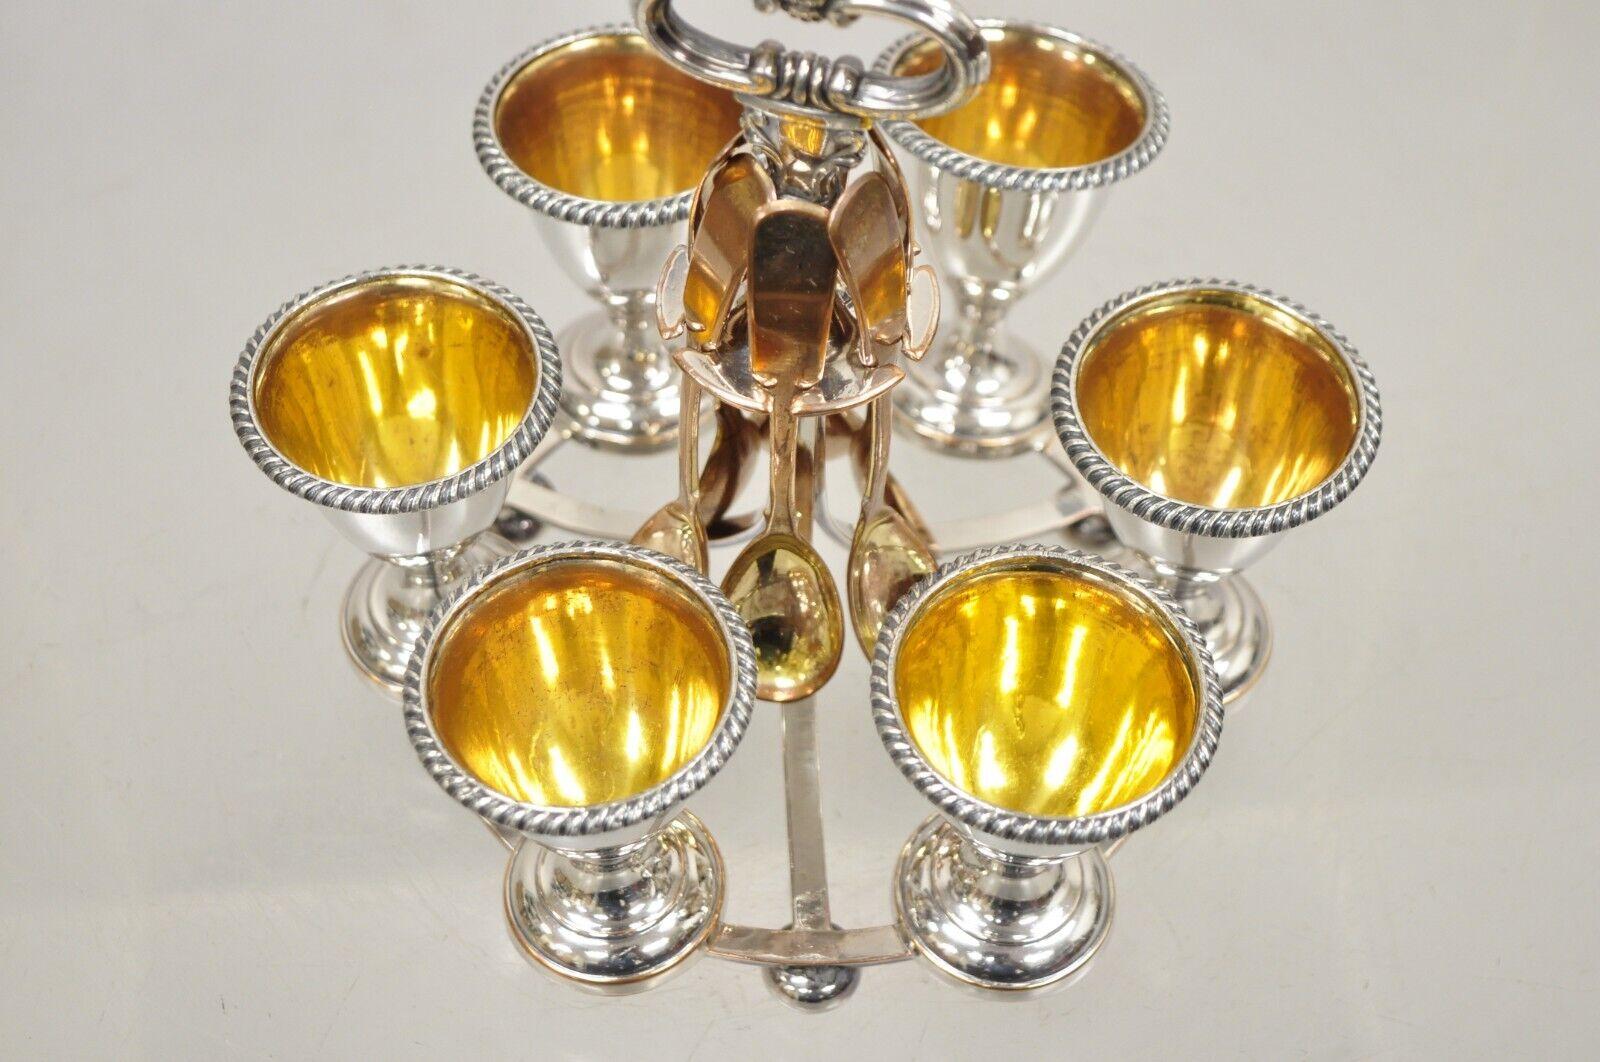 Antique Victorian Silver Plated Egg Server with Spoon Set - Serving for 6 For Sale 2